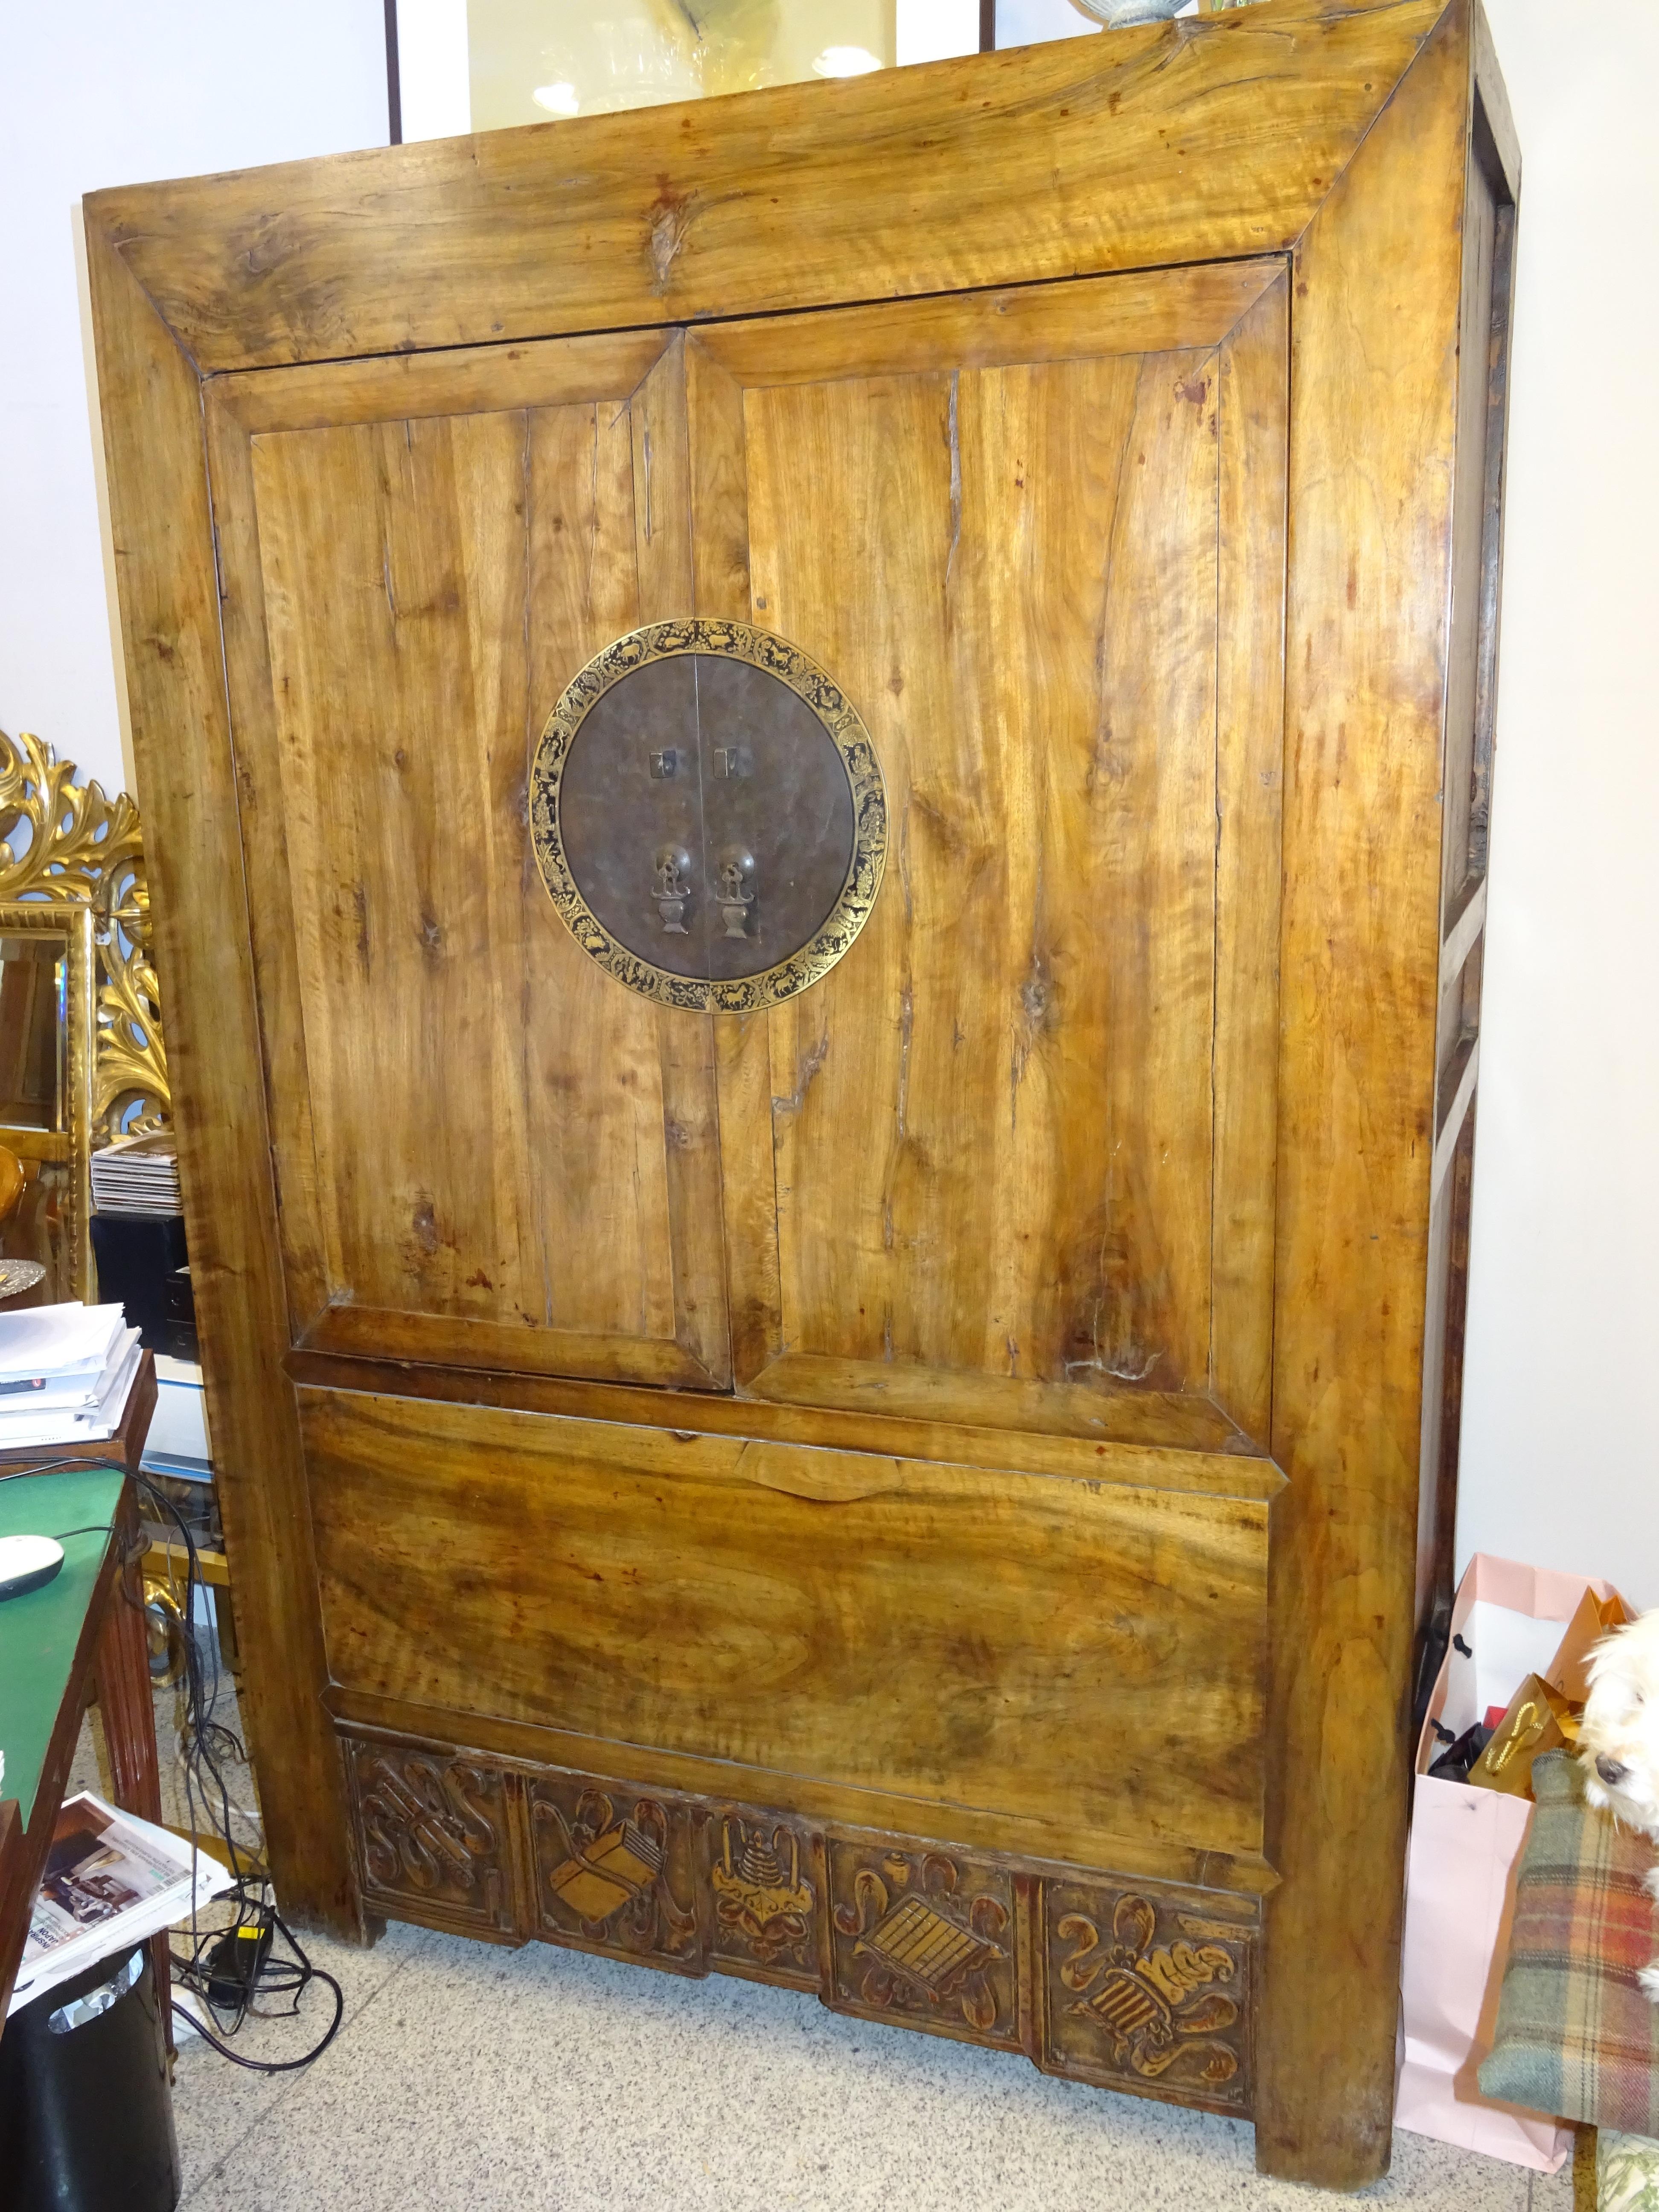 Stunning elmwood and brass Chinese wardrobe with clean lines and a clean and robust profile.
It has 2 doors and inside there is a shelf and a space for a chest or trunk.
In the lock there is a circle in golden brass with the signs of Chinese